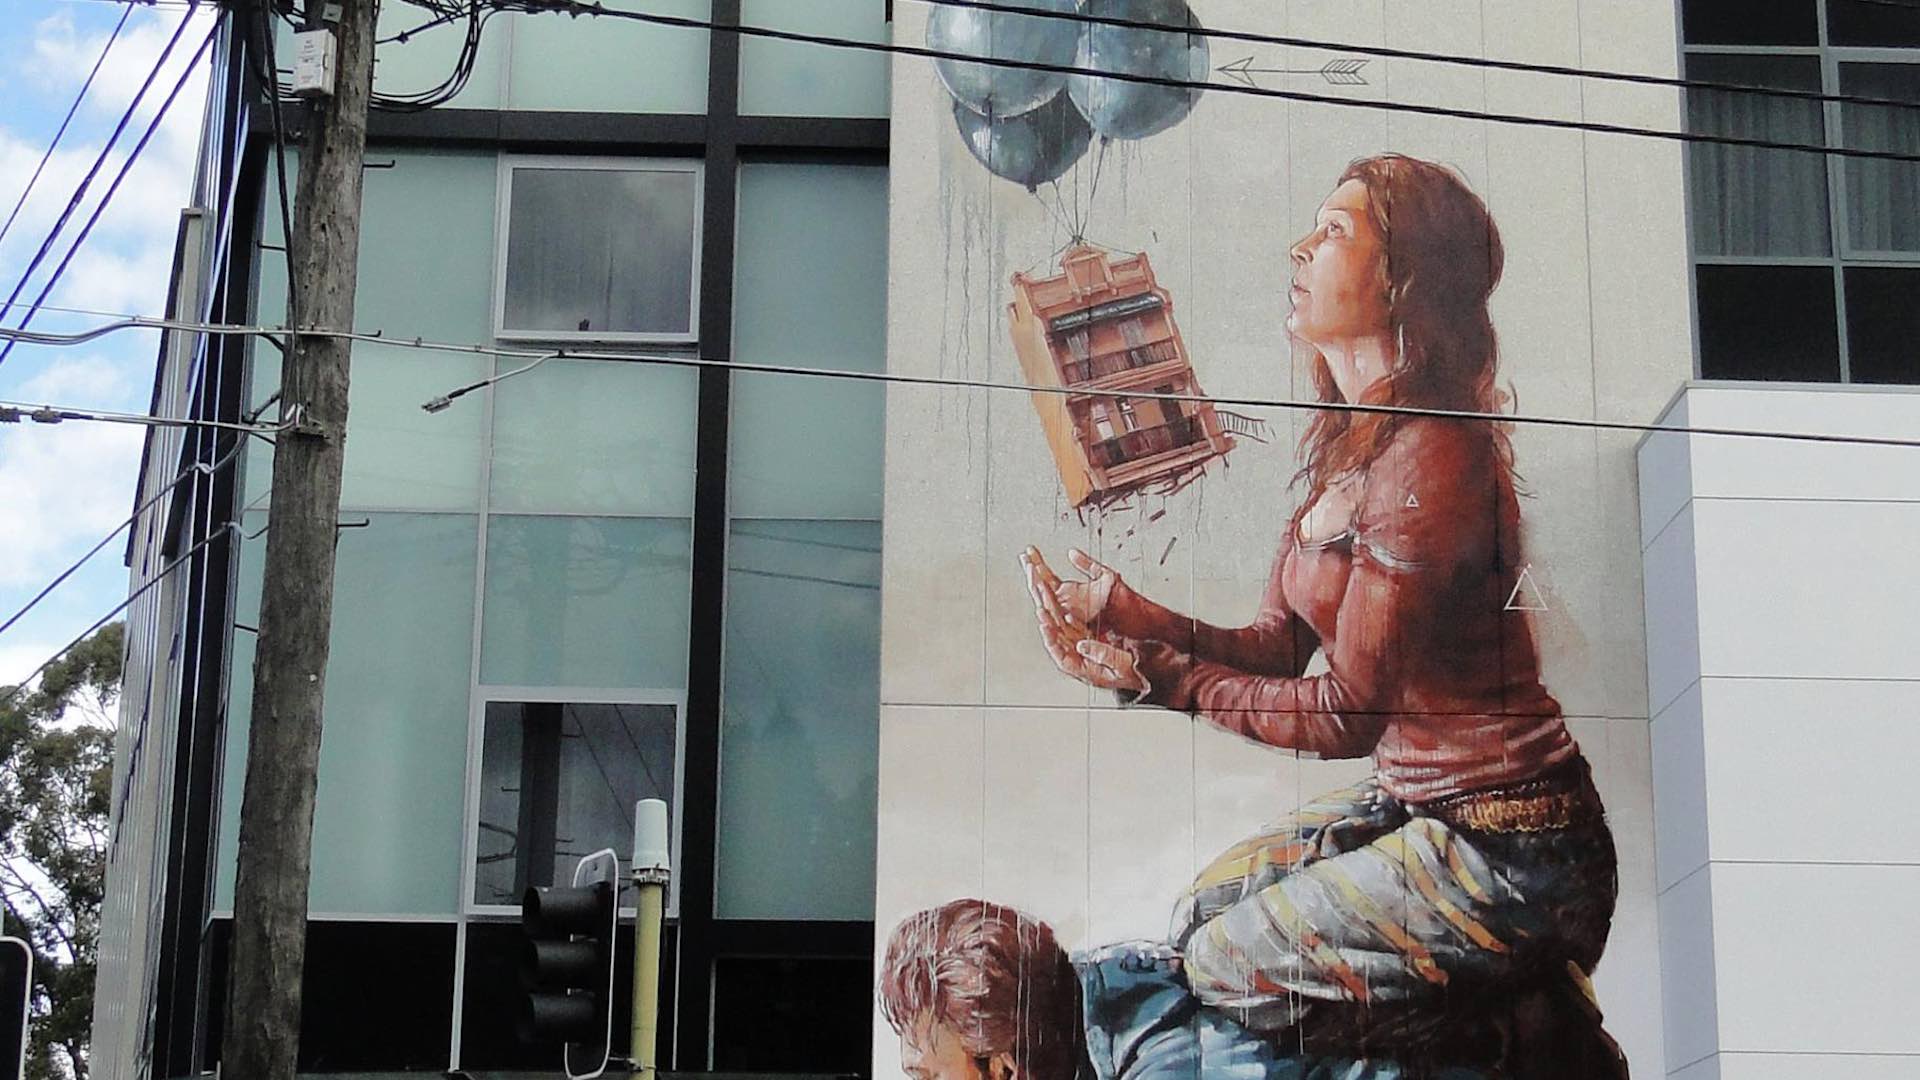 Housing Bubble mural by Fintan Magee